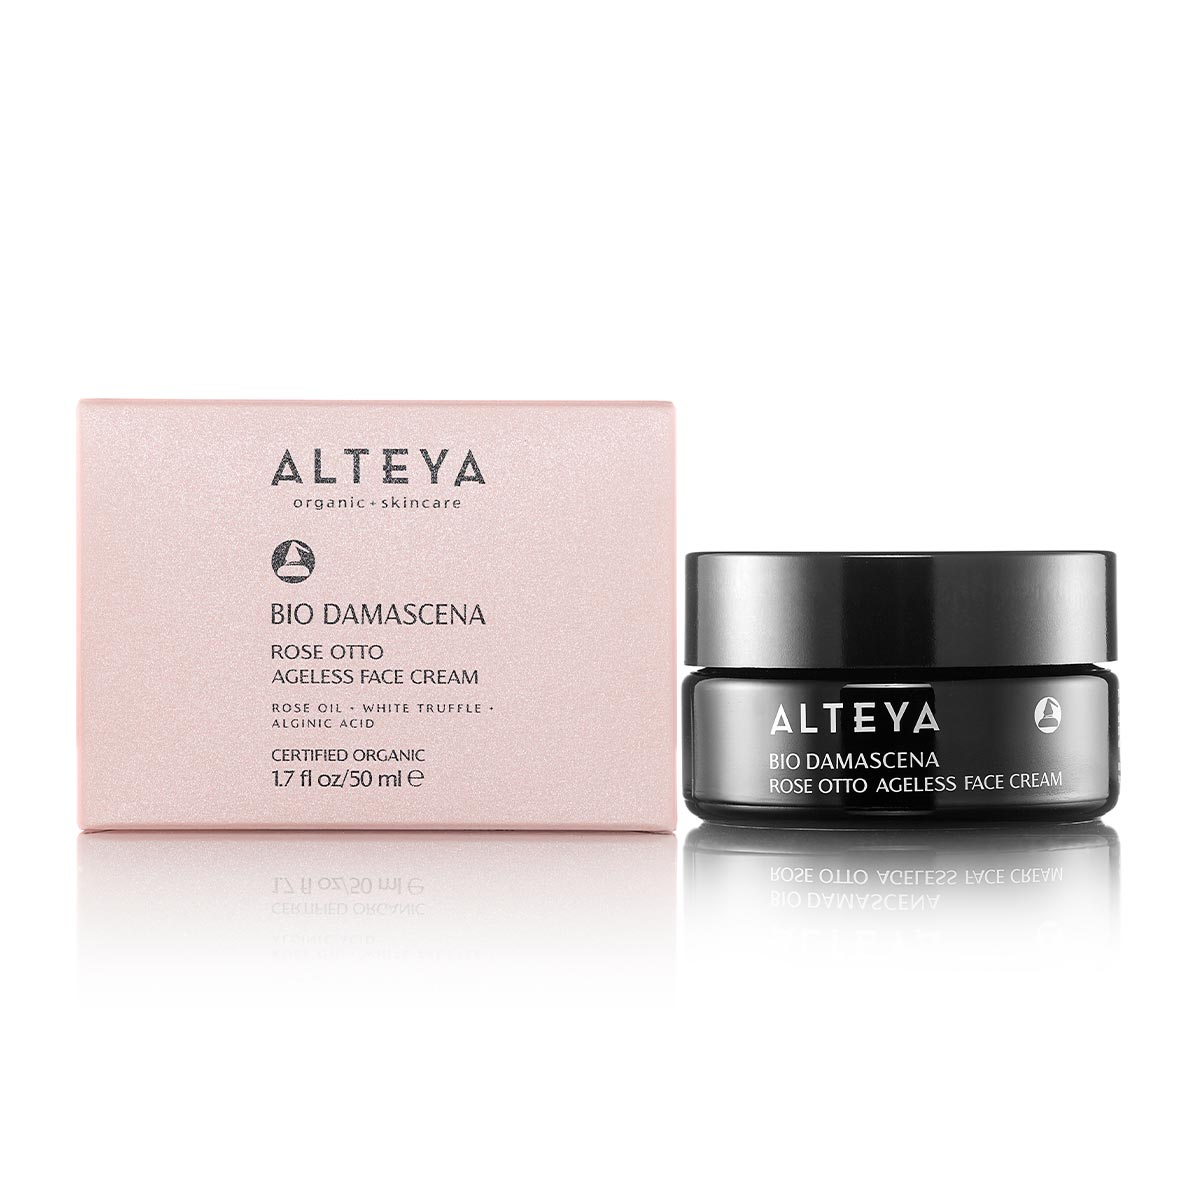 Alteya Organics Bio Damascena Rose Otto Ageless Face Cream is an indulgent skincare product infused with the nourishing benefits of rose oil and white truffle extract. This luxurious face cream is designed to deeply hydrate.